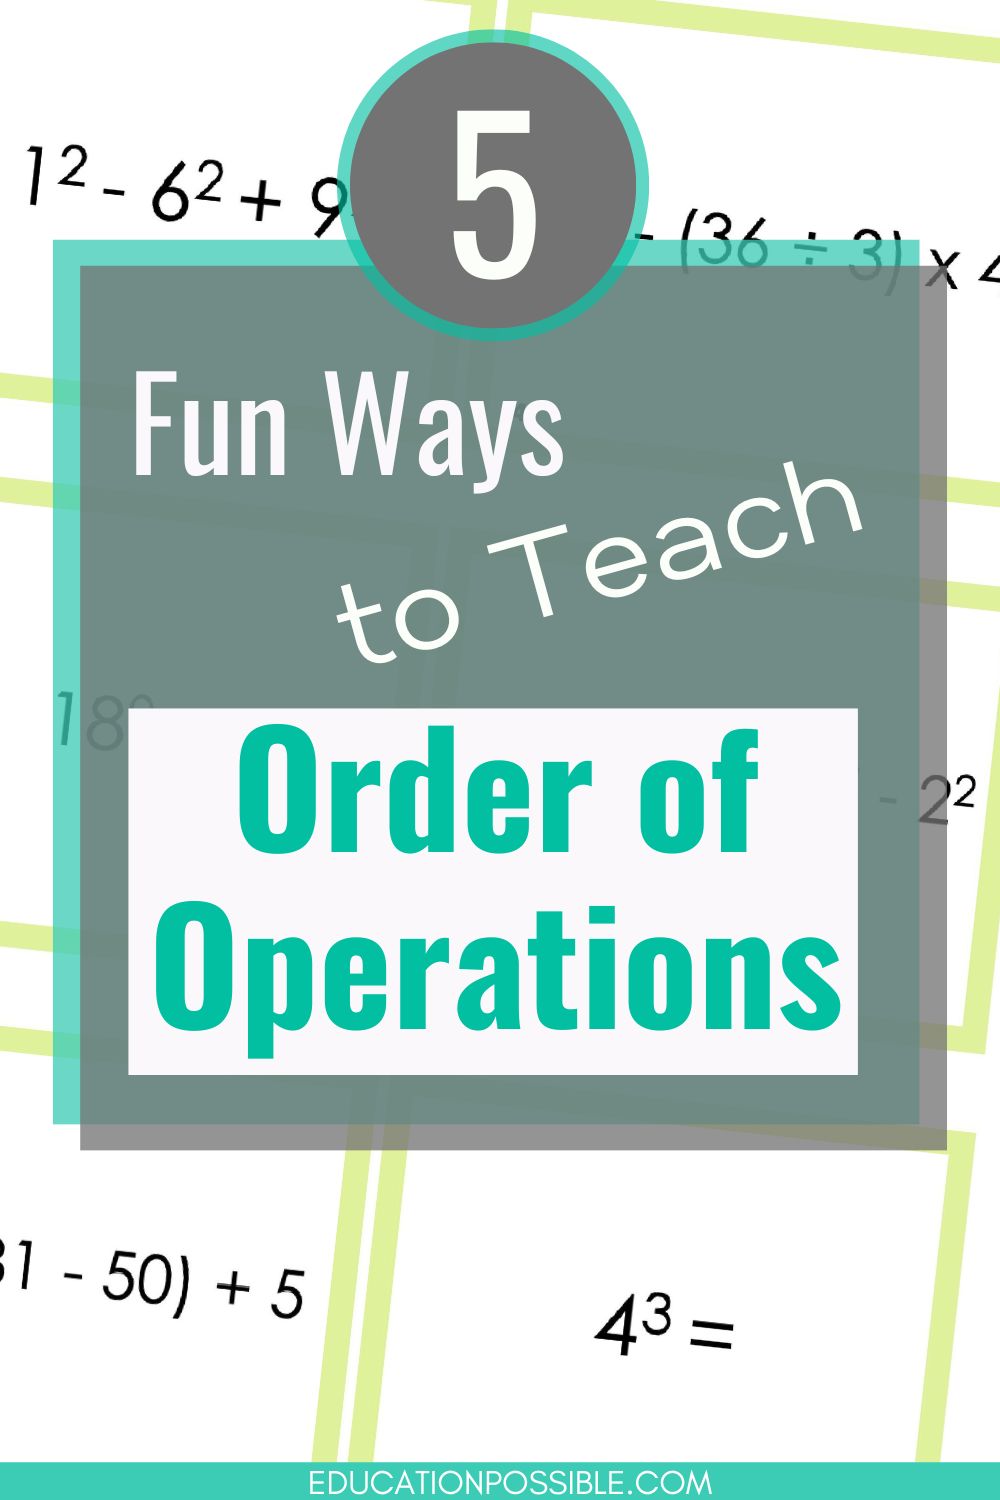 Fun Ways to Teach Order of Operations